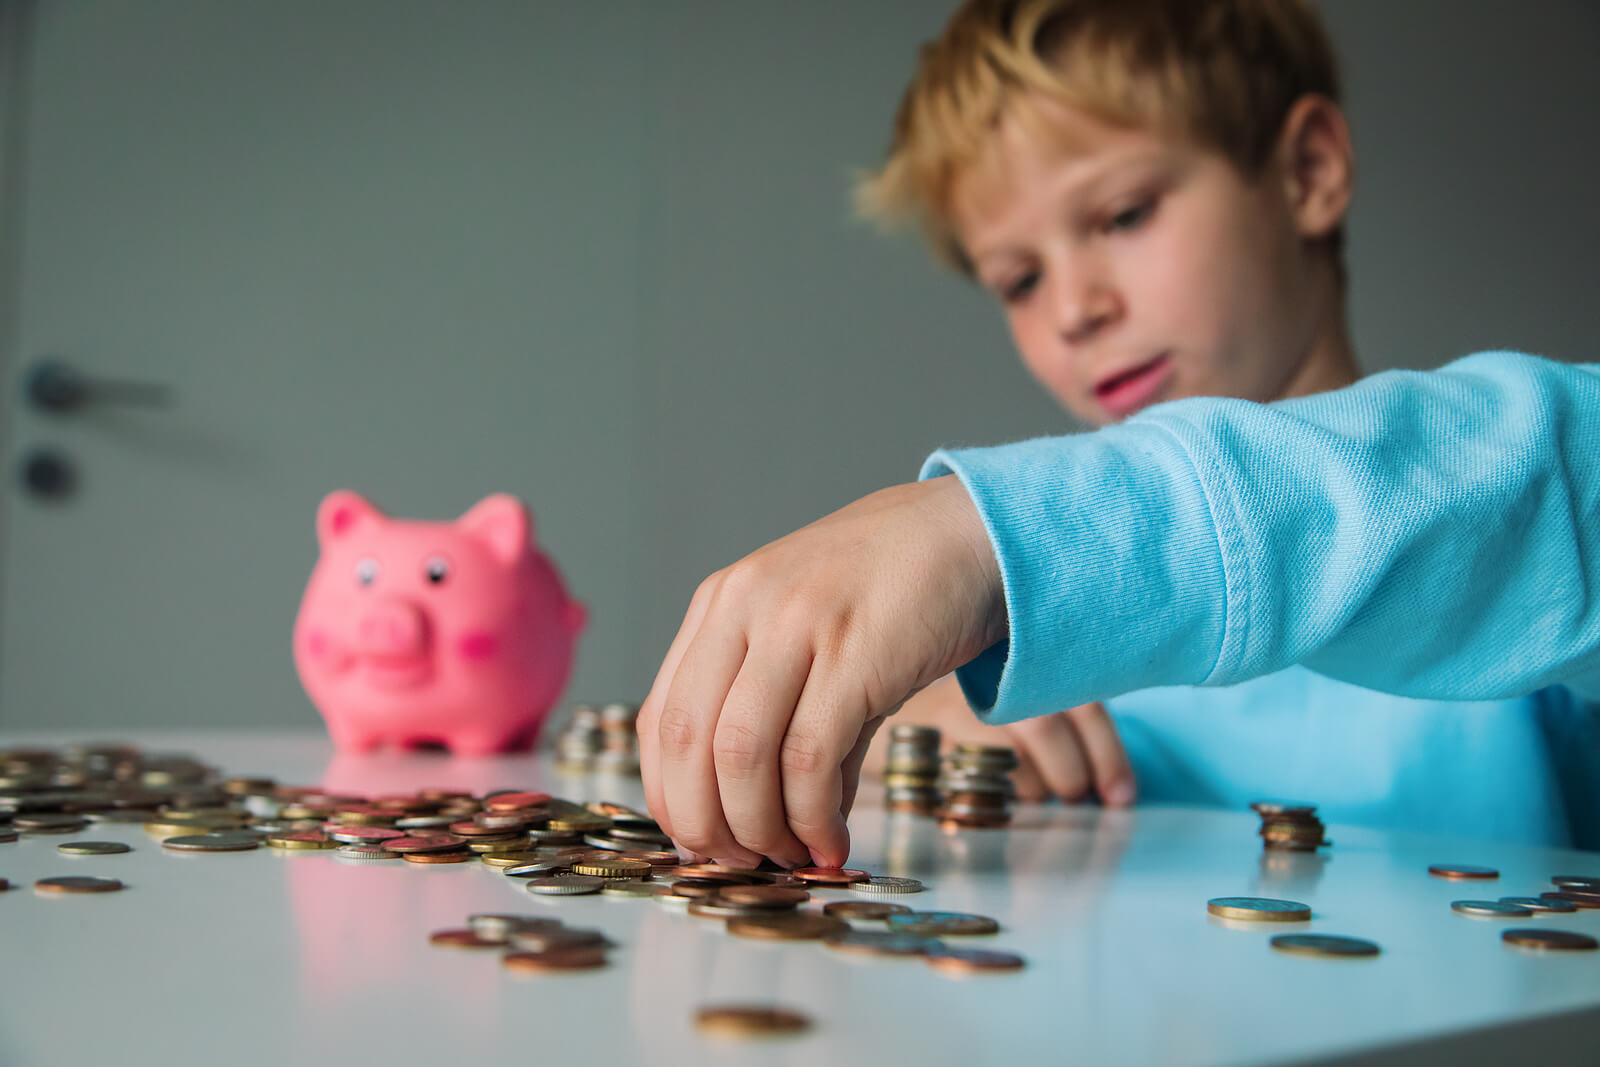 A child counting coins from his piggy bank.